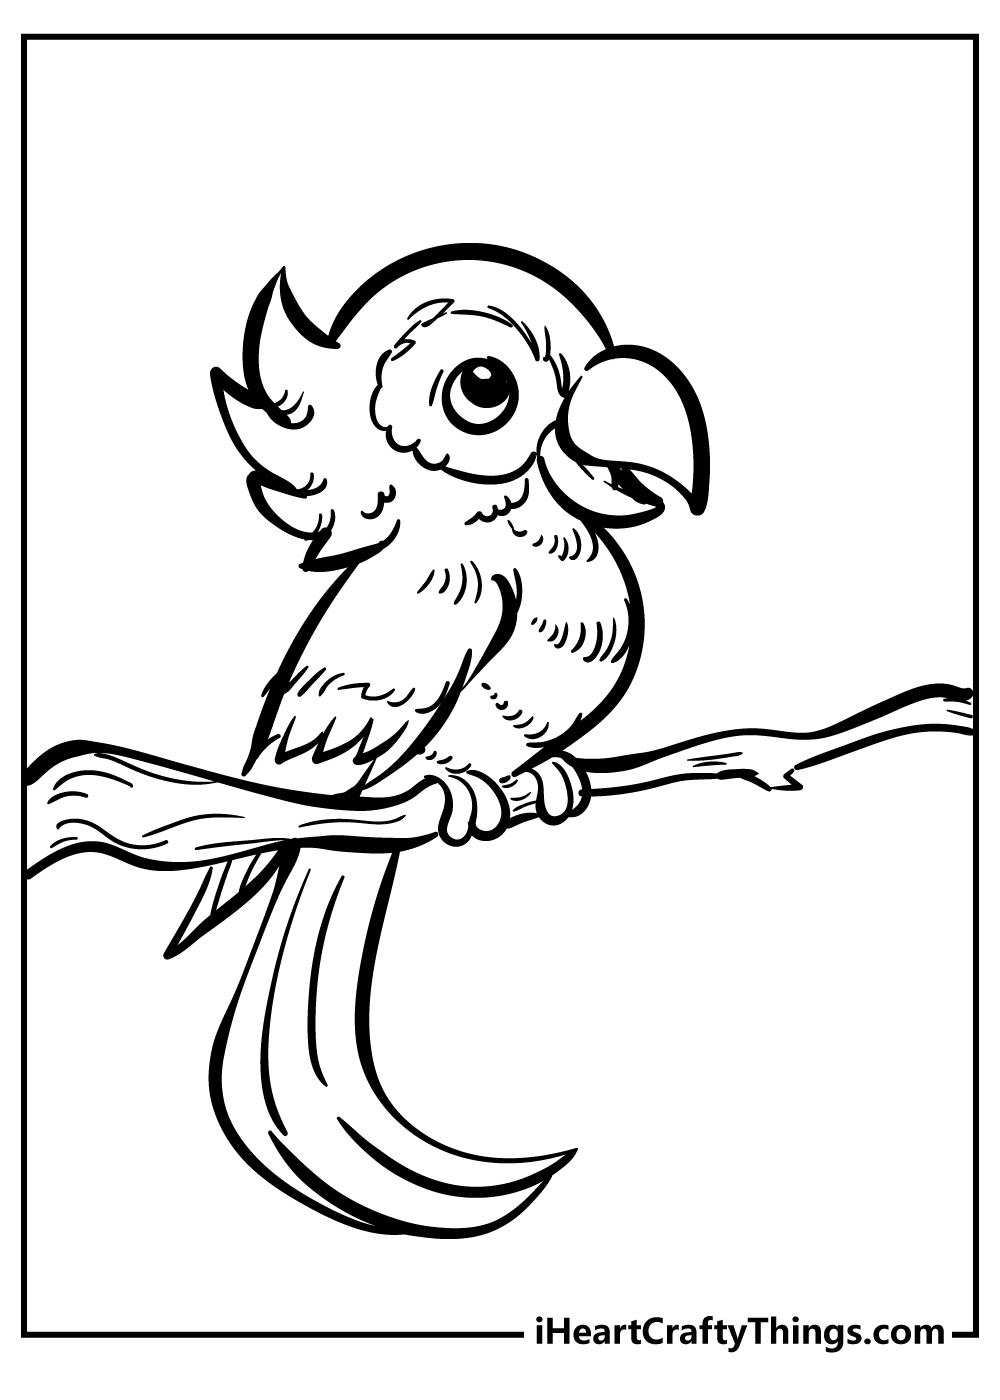 Unique Bird Coloring Pages Updated 21